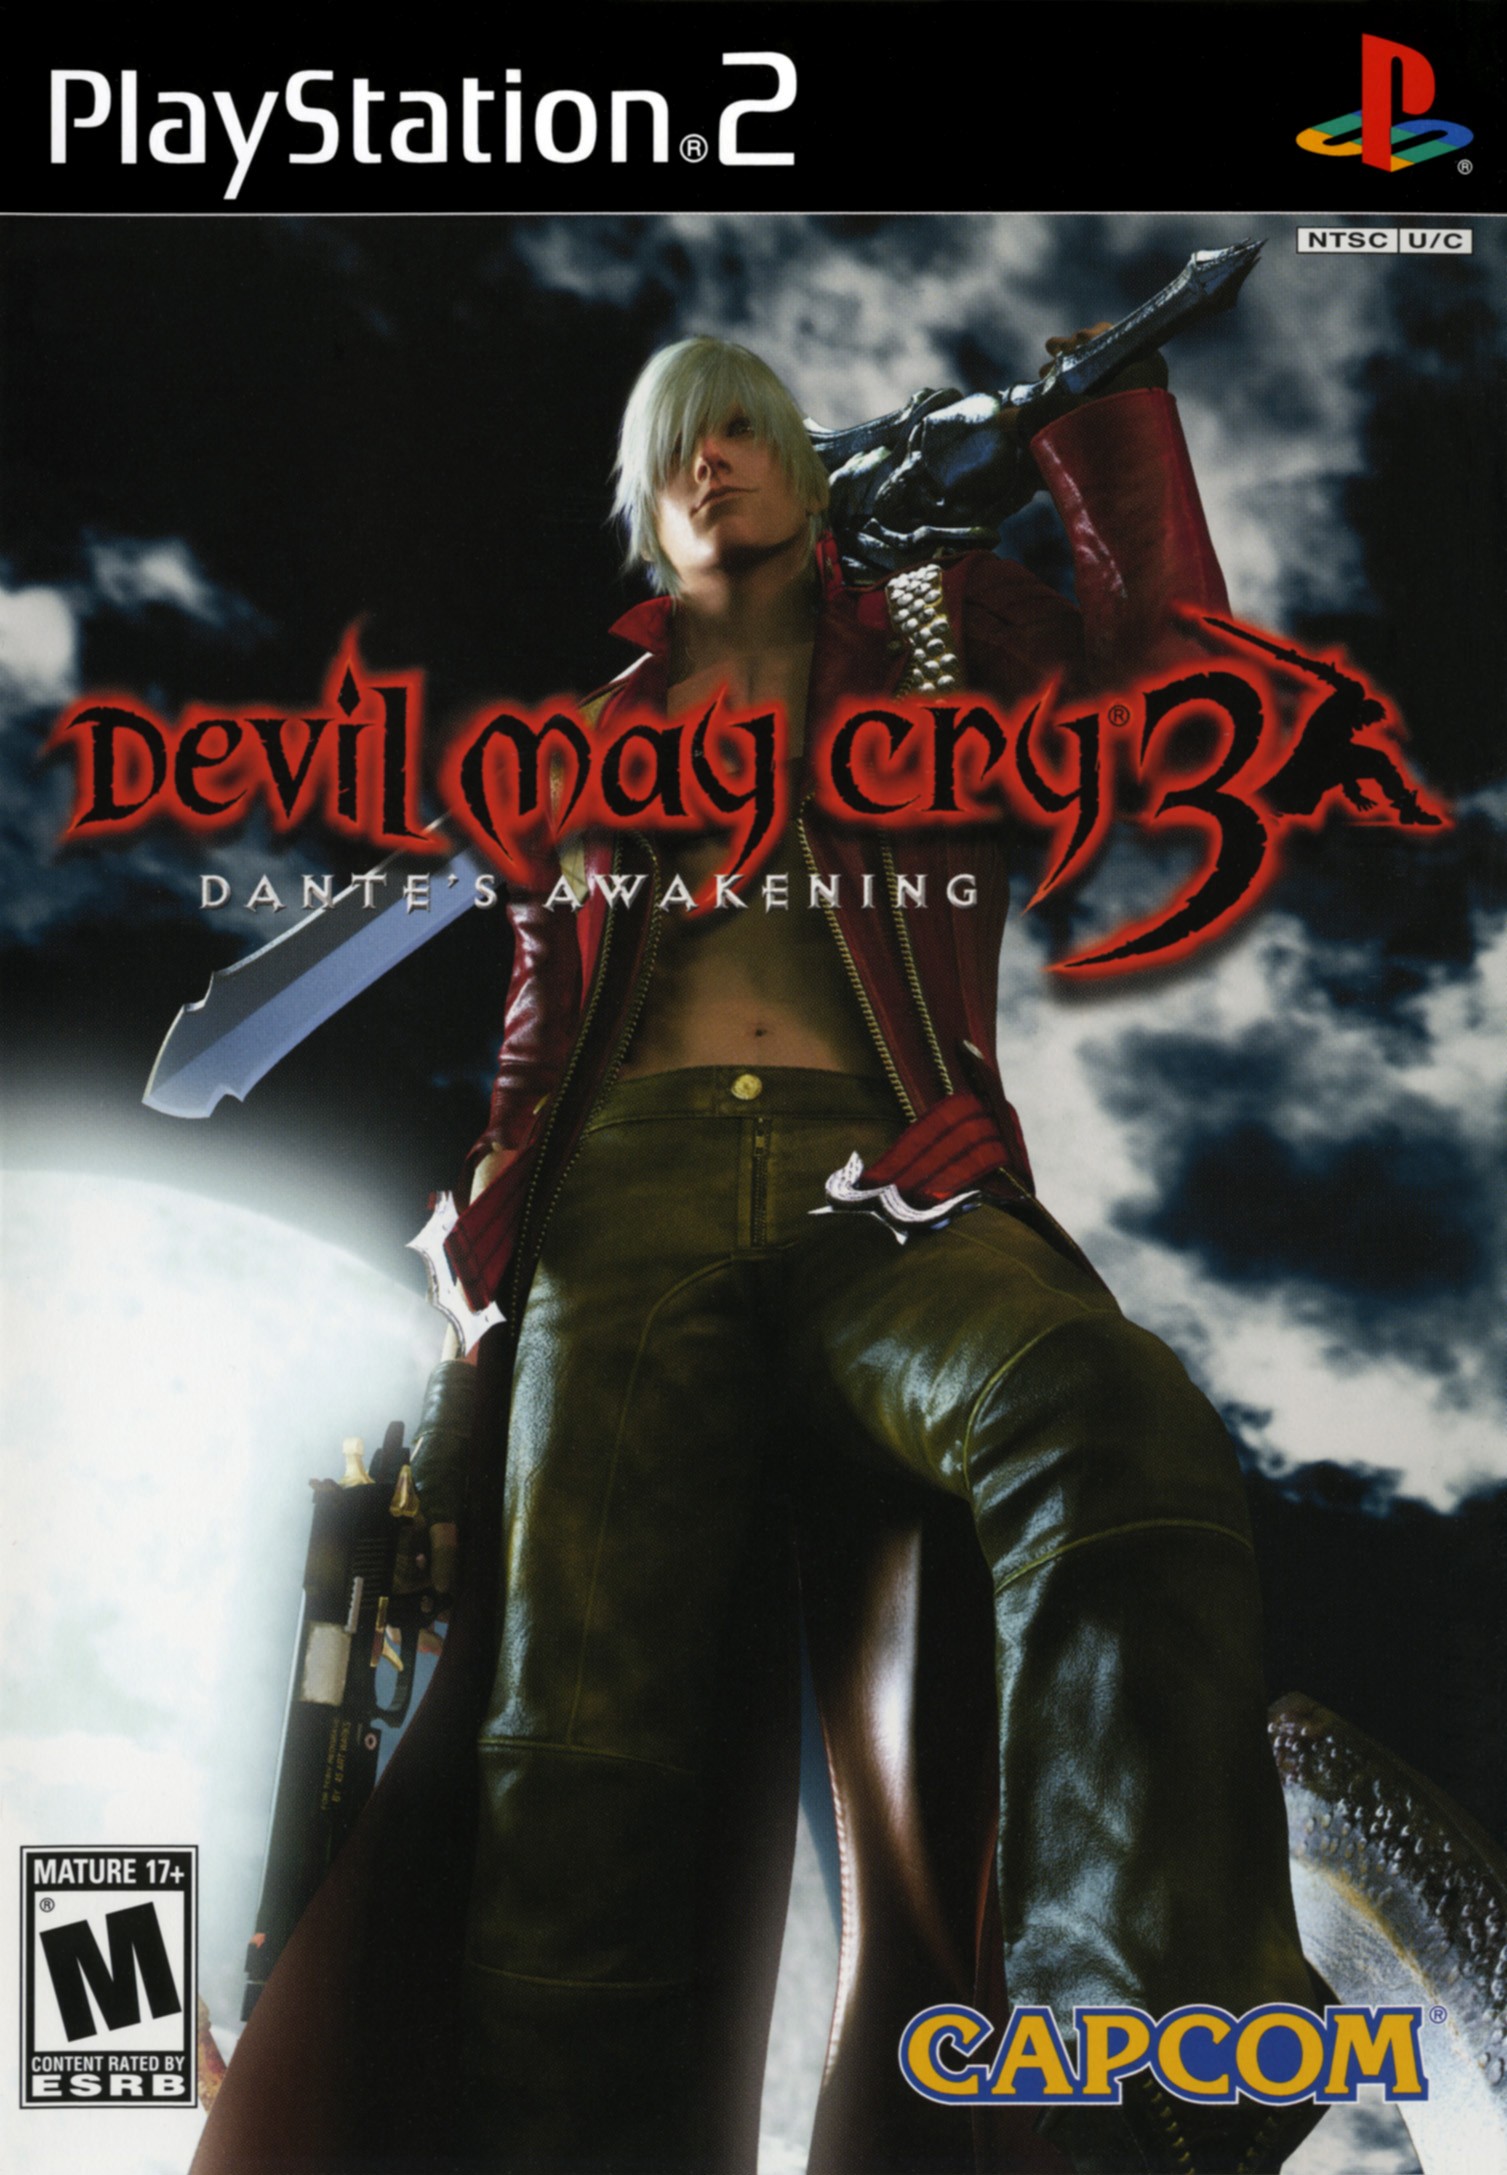 Steam Community :: Guide :: Devil May Cry HD collection Mod